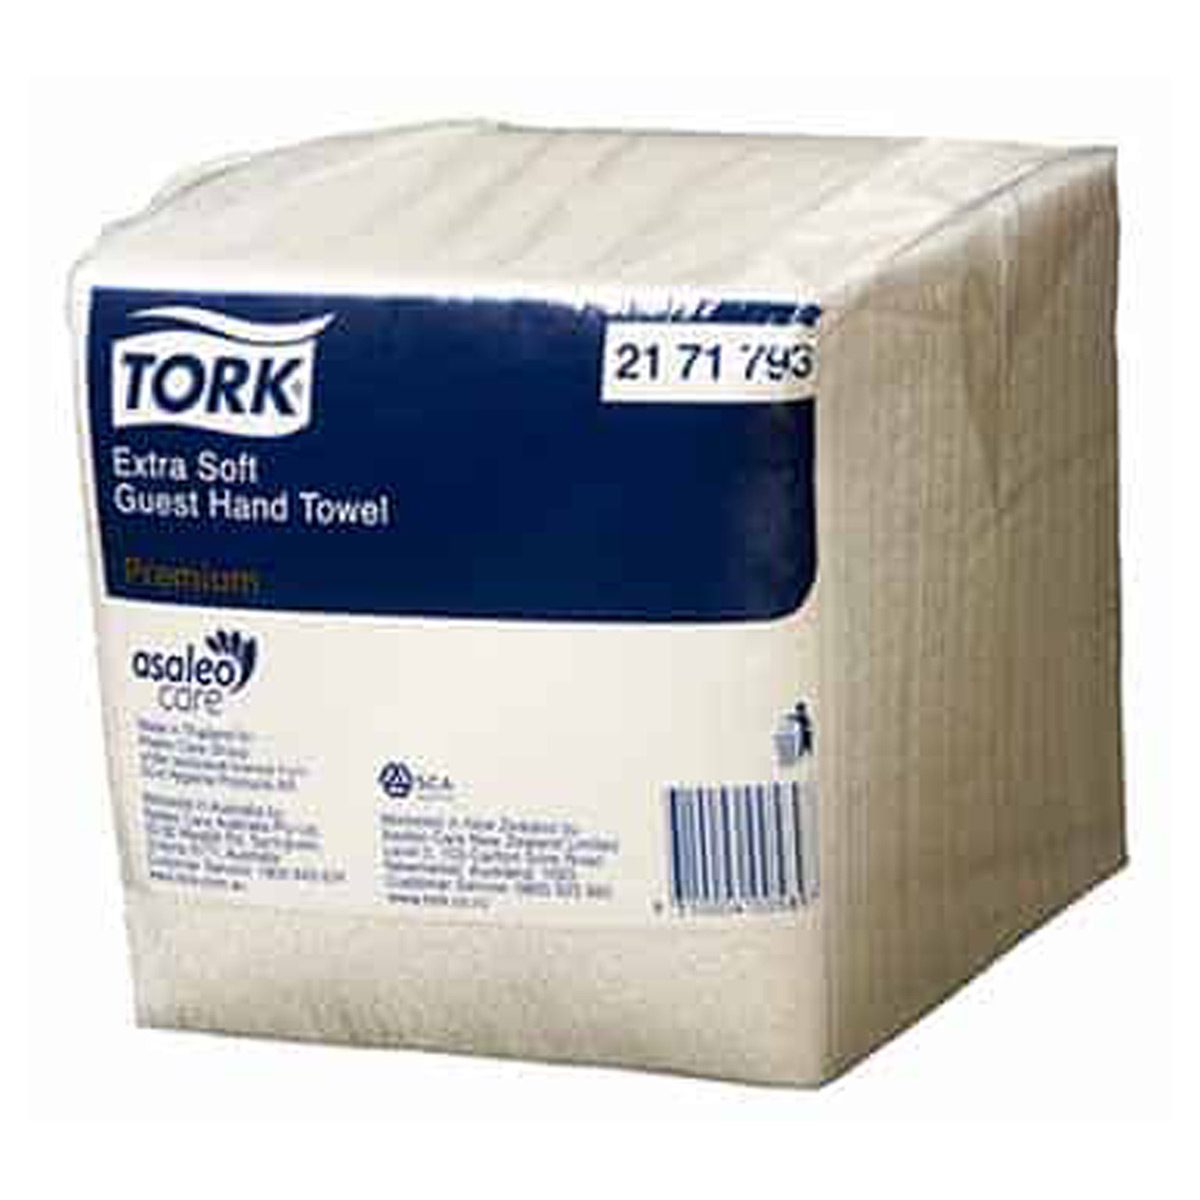 paper-products-paper-towels-tork-white-extra-soft-hand-towel-1-ply-100-sheets-4-packs-premium-hand-towel-unique-thickness-softness-absorbency-vjs-distributors-2171793